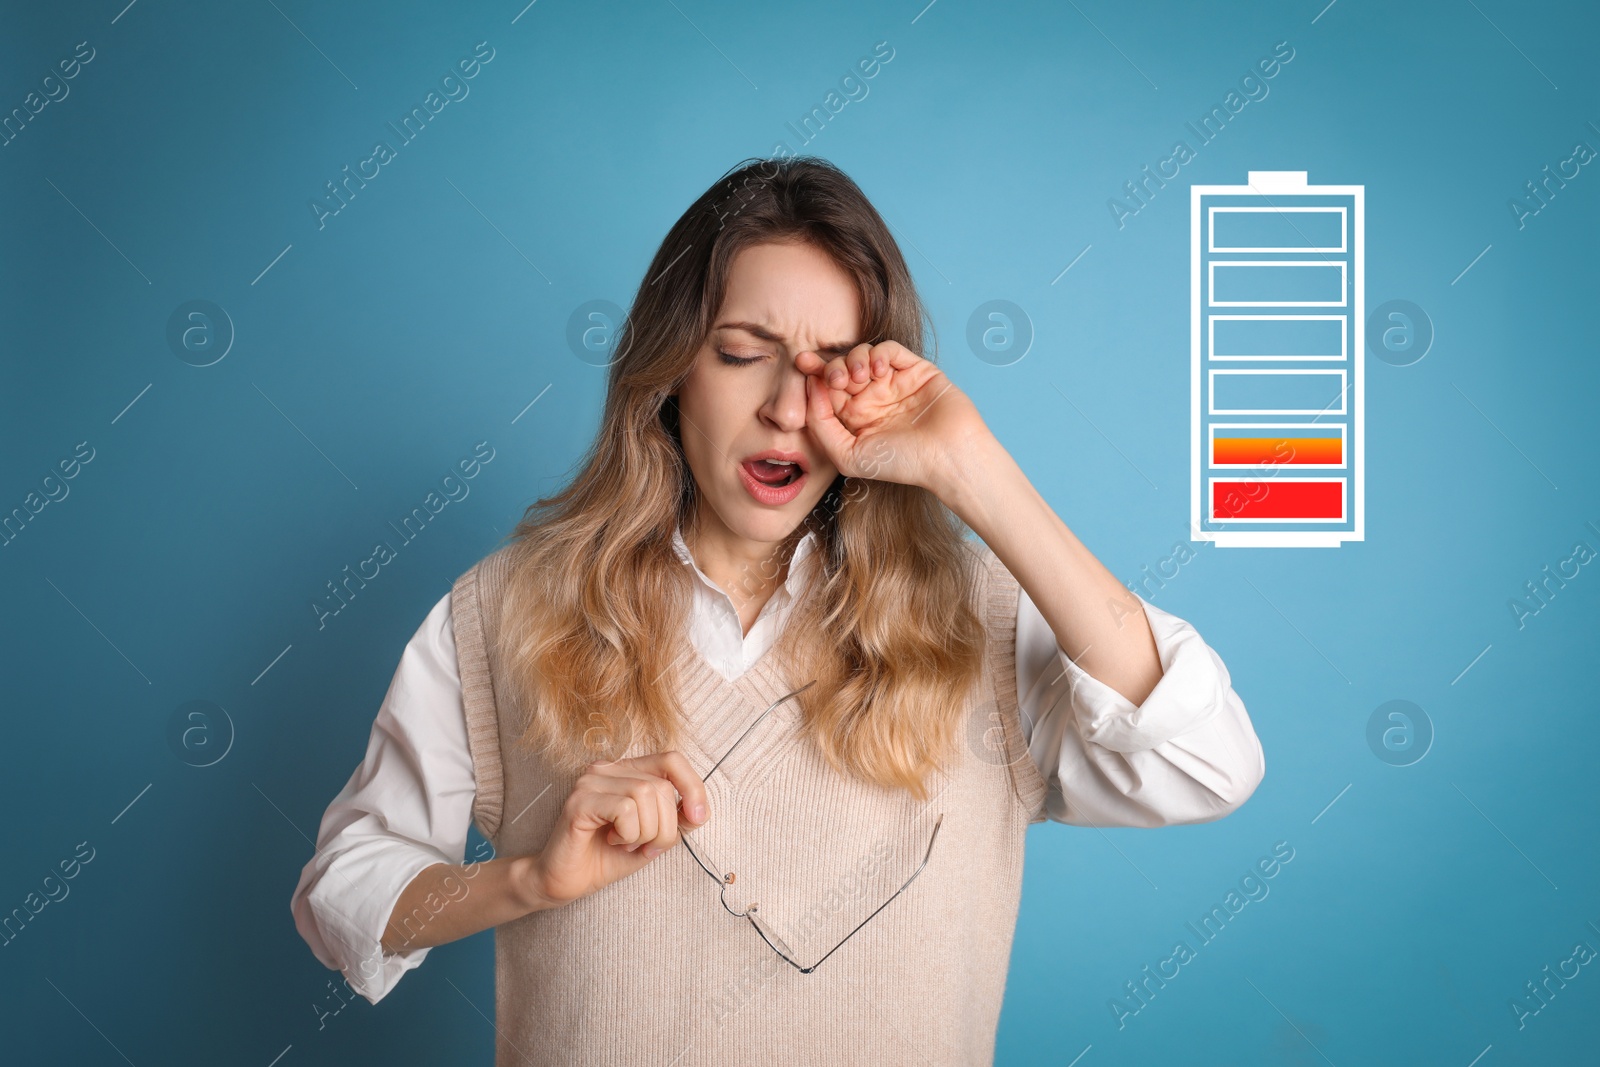 Image of Tired woman yawning and illustration of discharged battery on light blue background